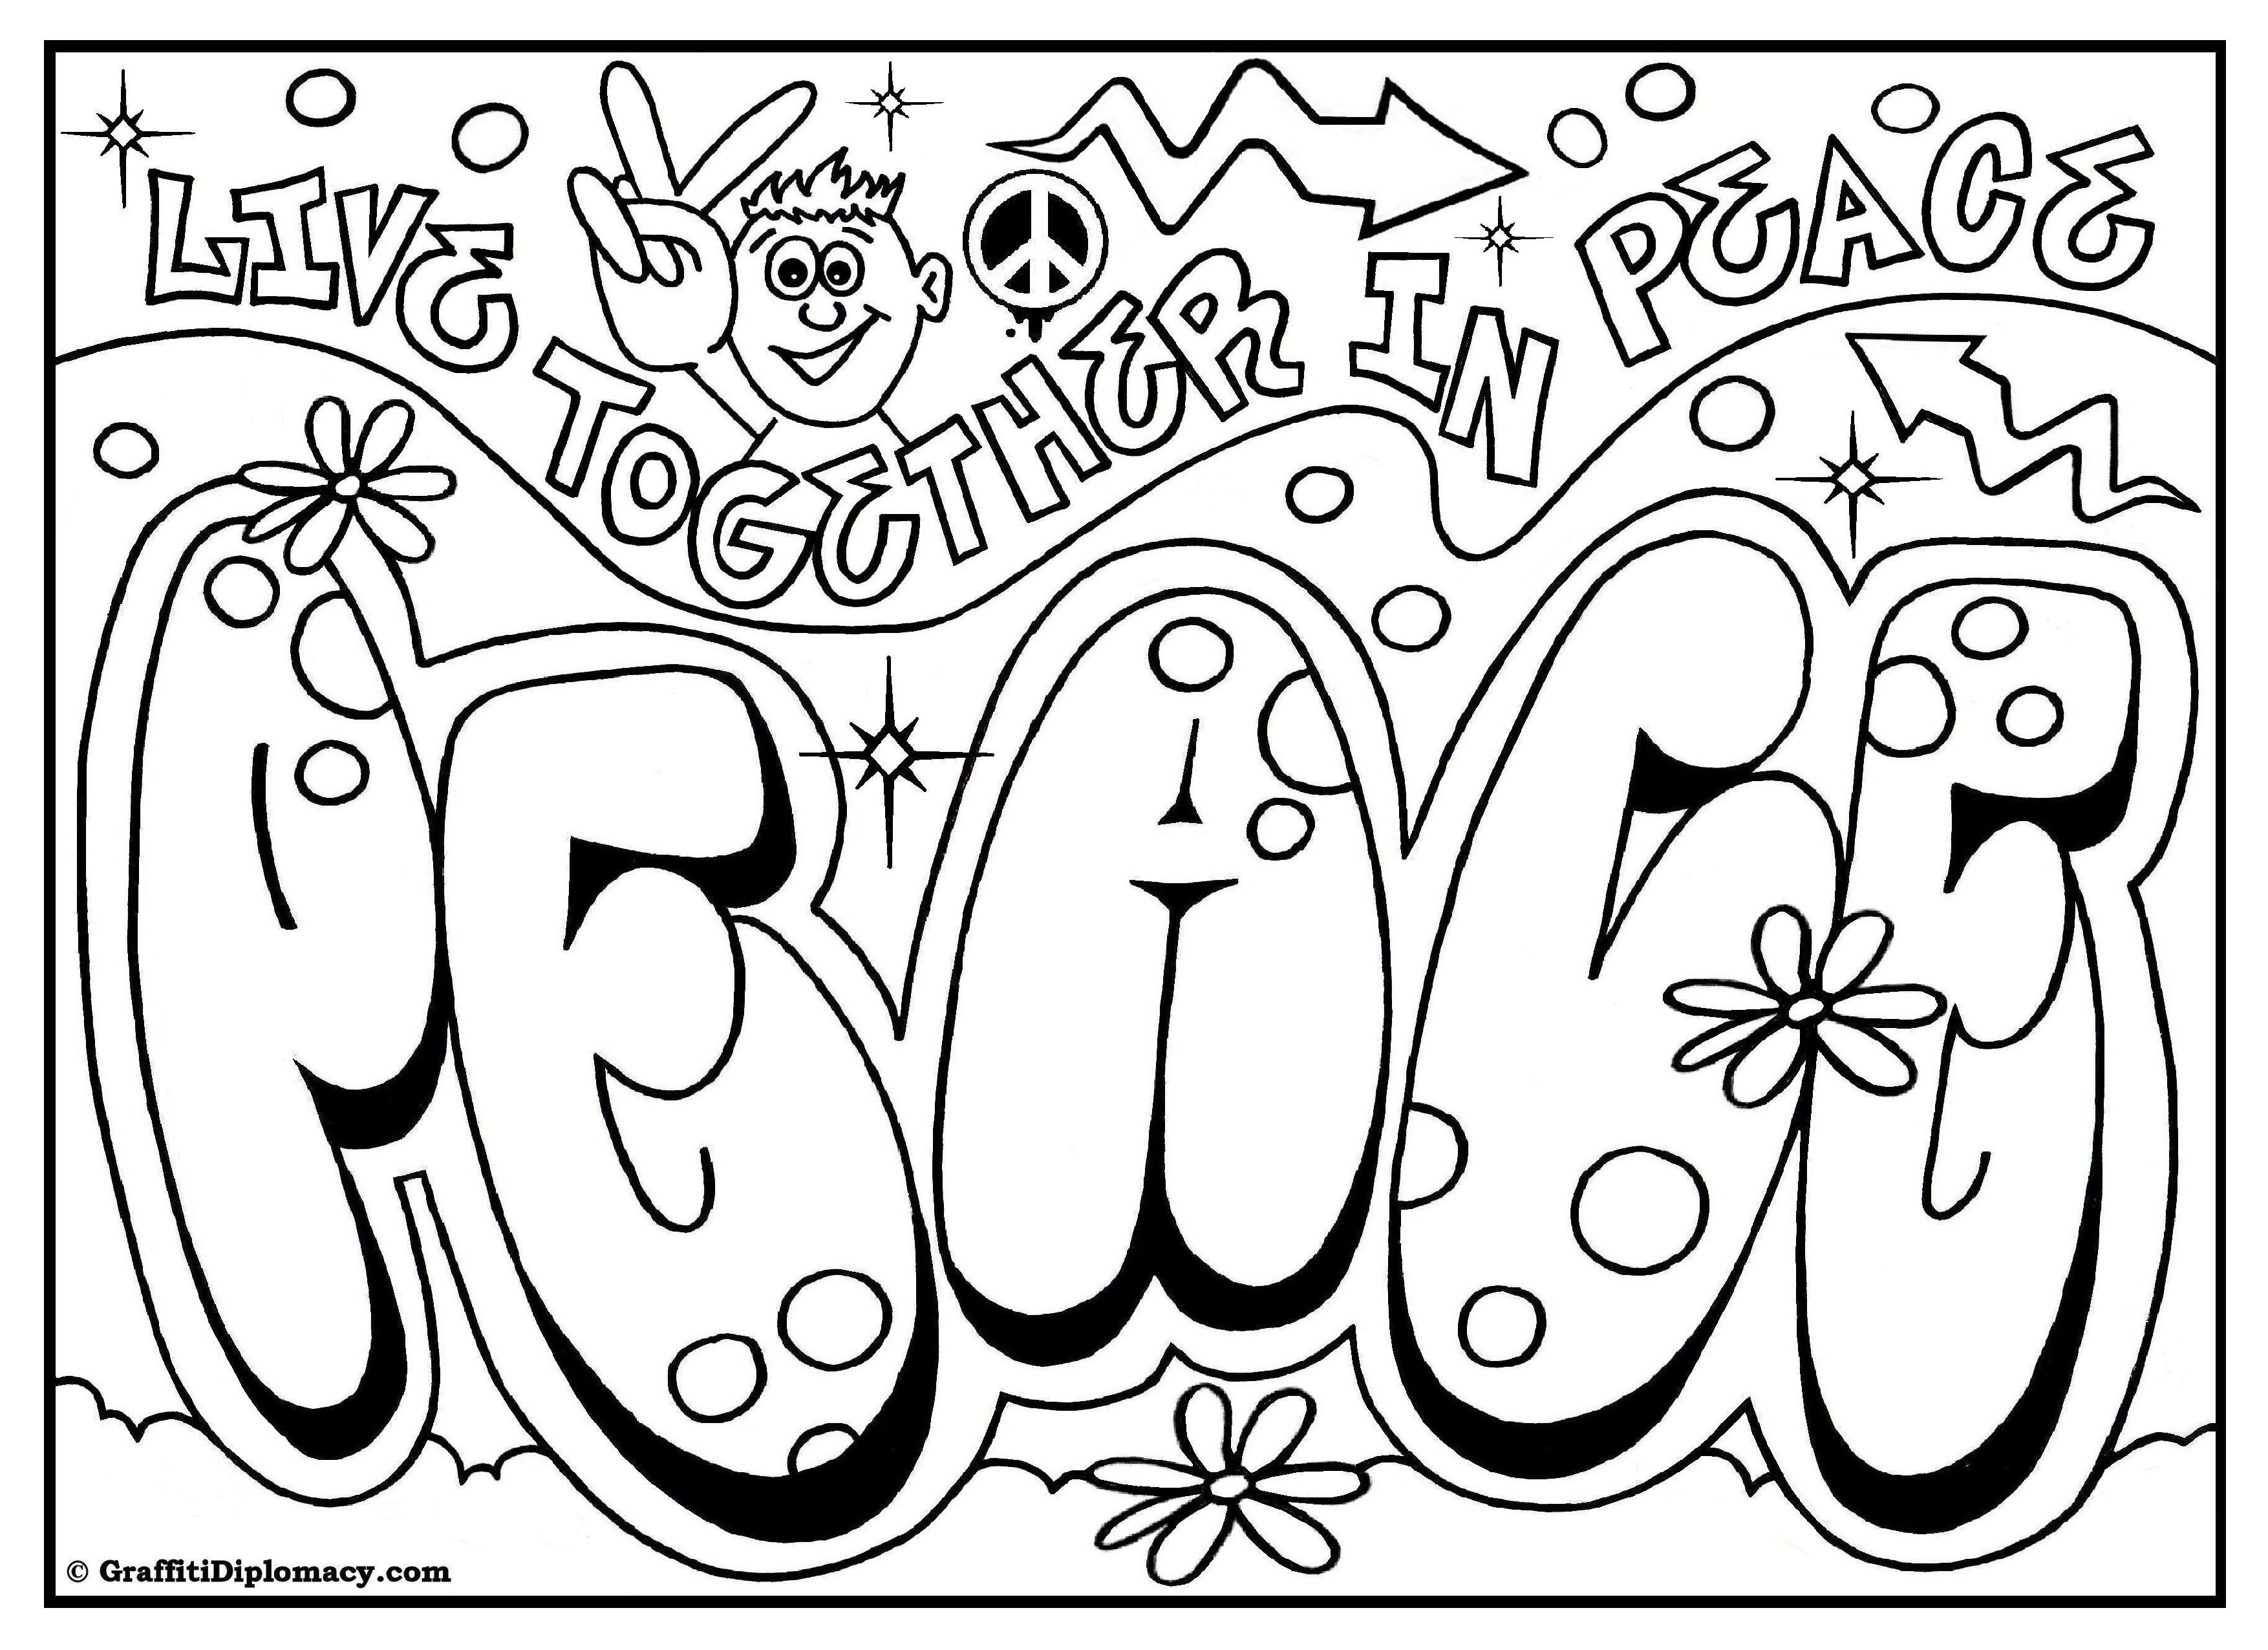 How To Print Coloring Pages Coloring Book 62 Tremendous How Do You Print Coloring Pages